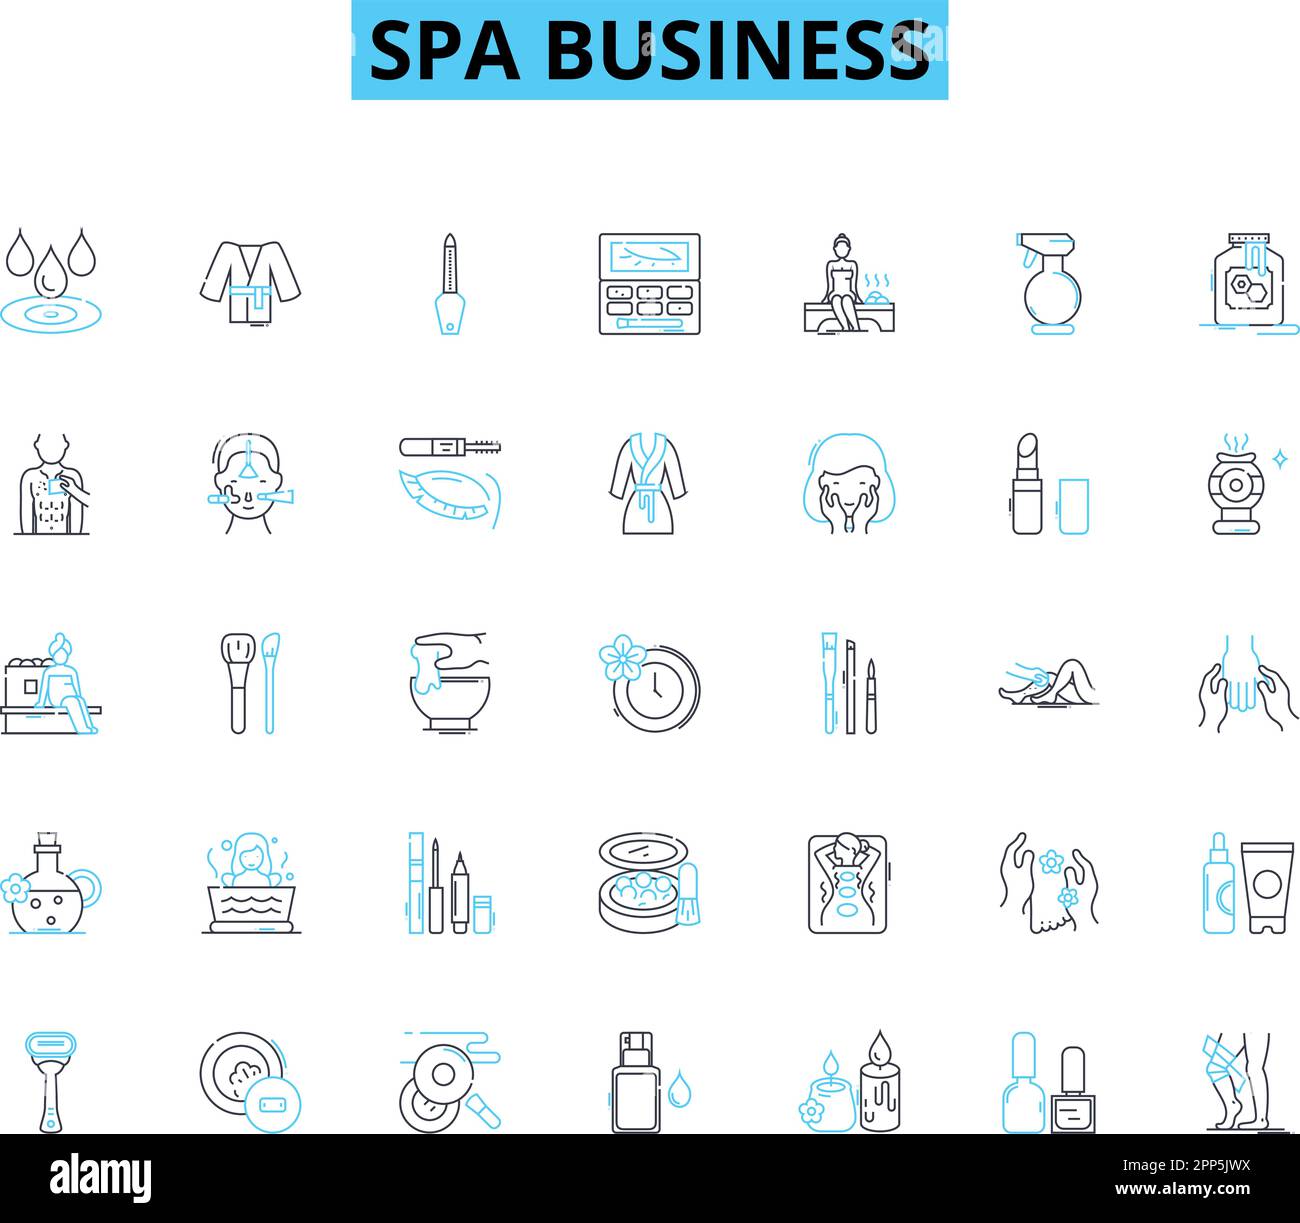 Spa business linear icons set. Relaxation, Pampering, Therapy, Serenity, Massage, Wellness, Aromatherapy line vector and concept signs. Renewal Stock Vector